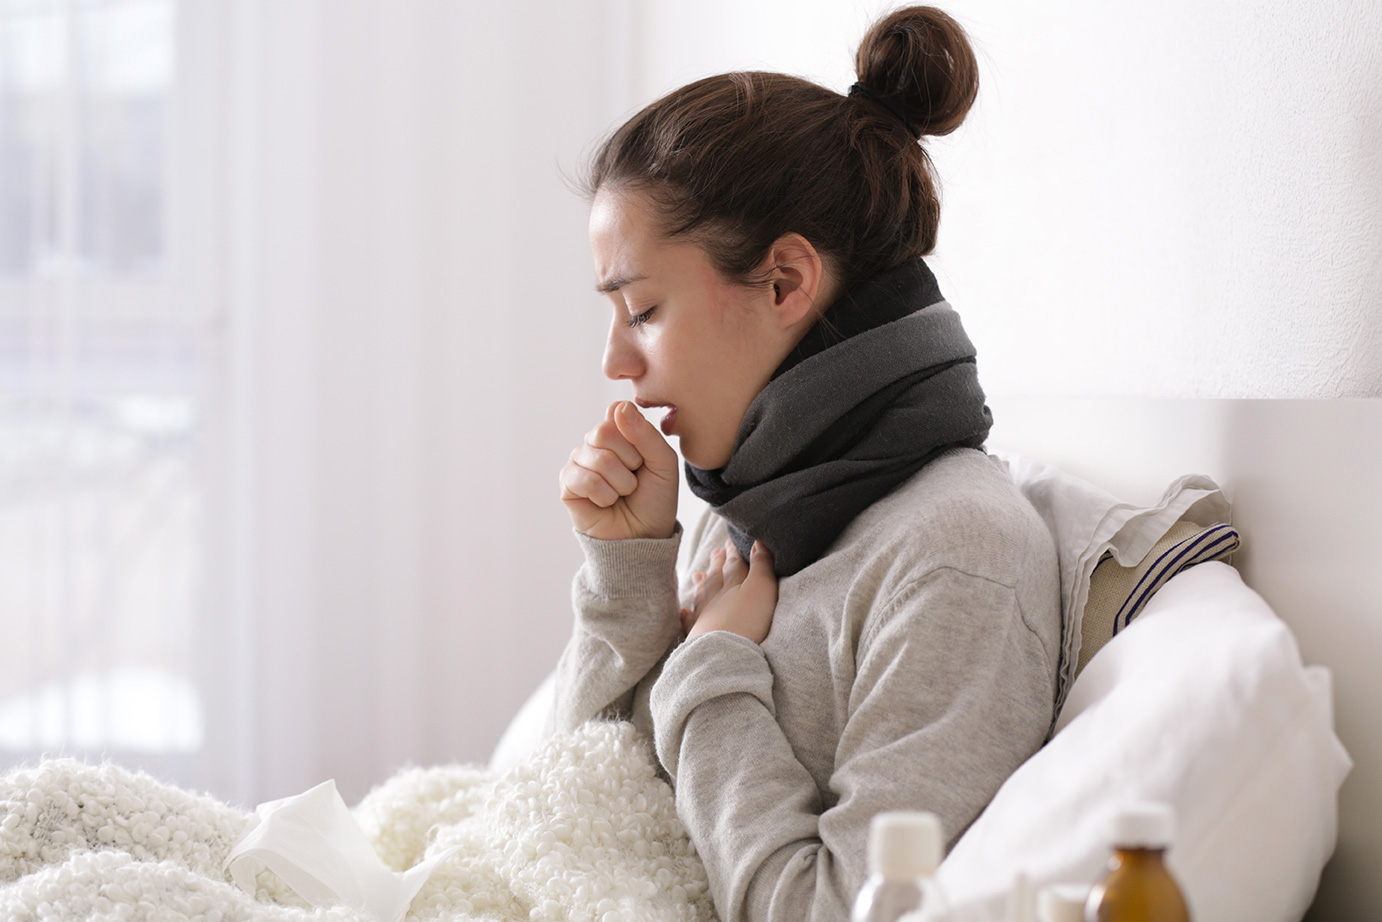 what happens when the caregiver gets sick?